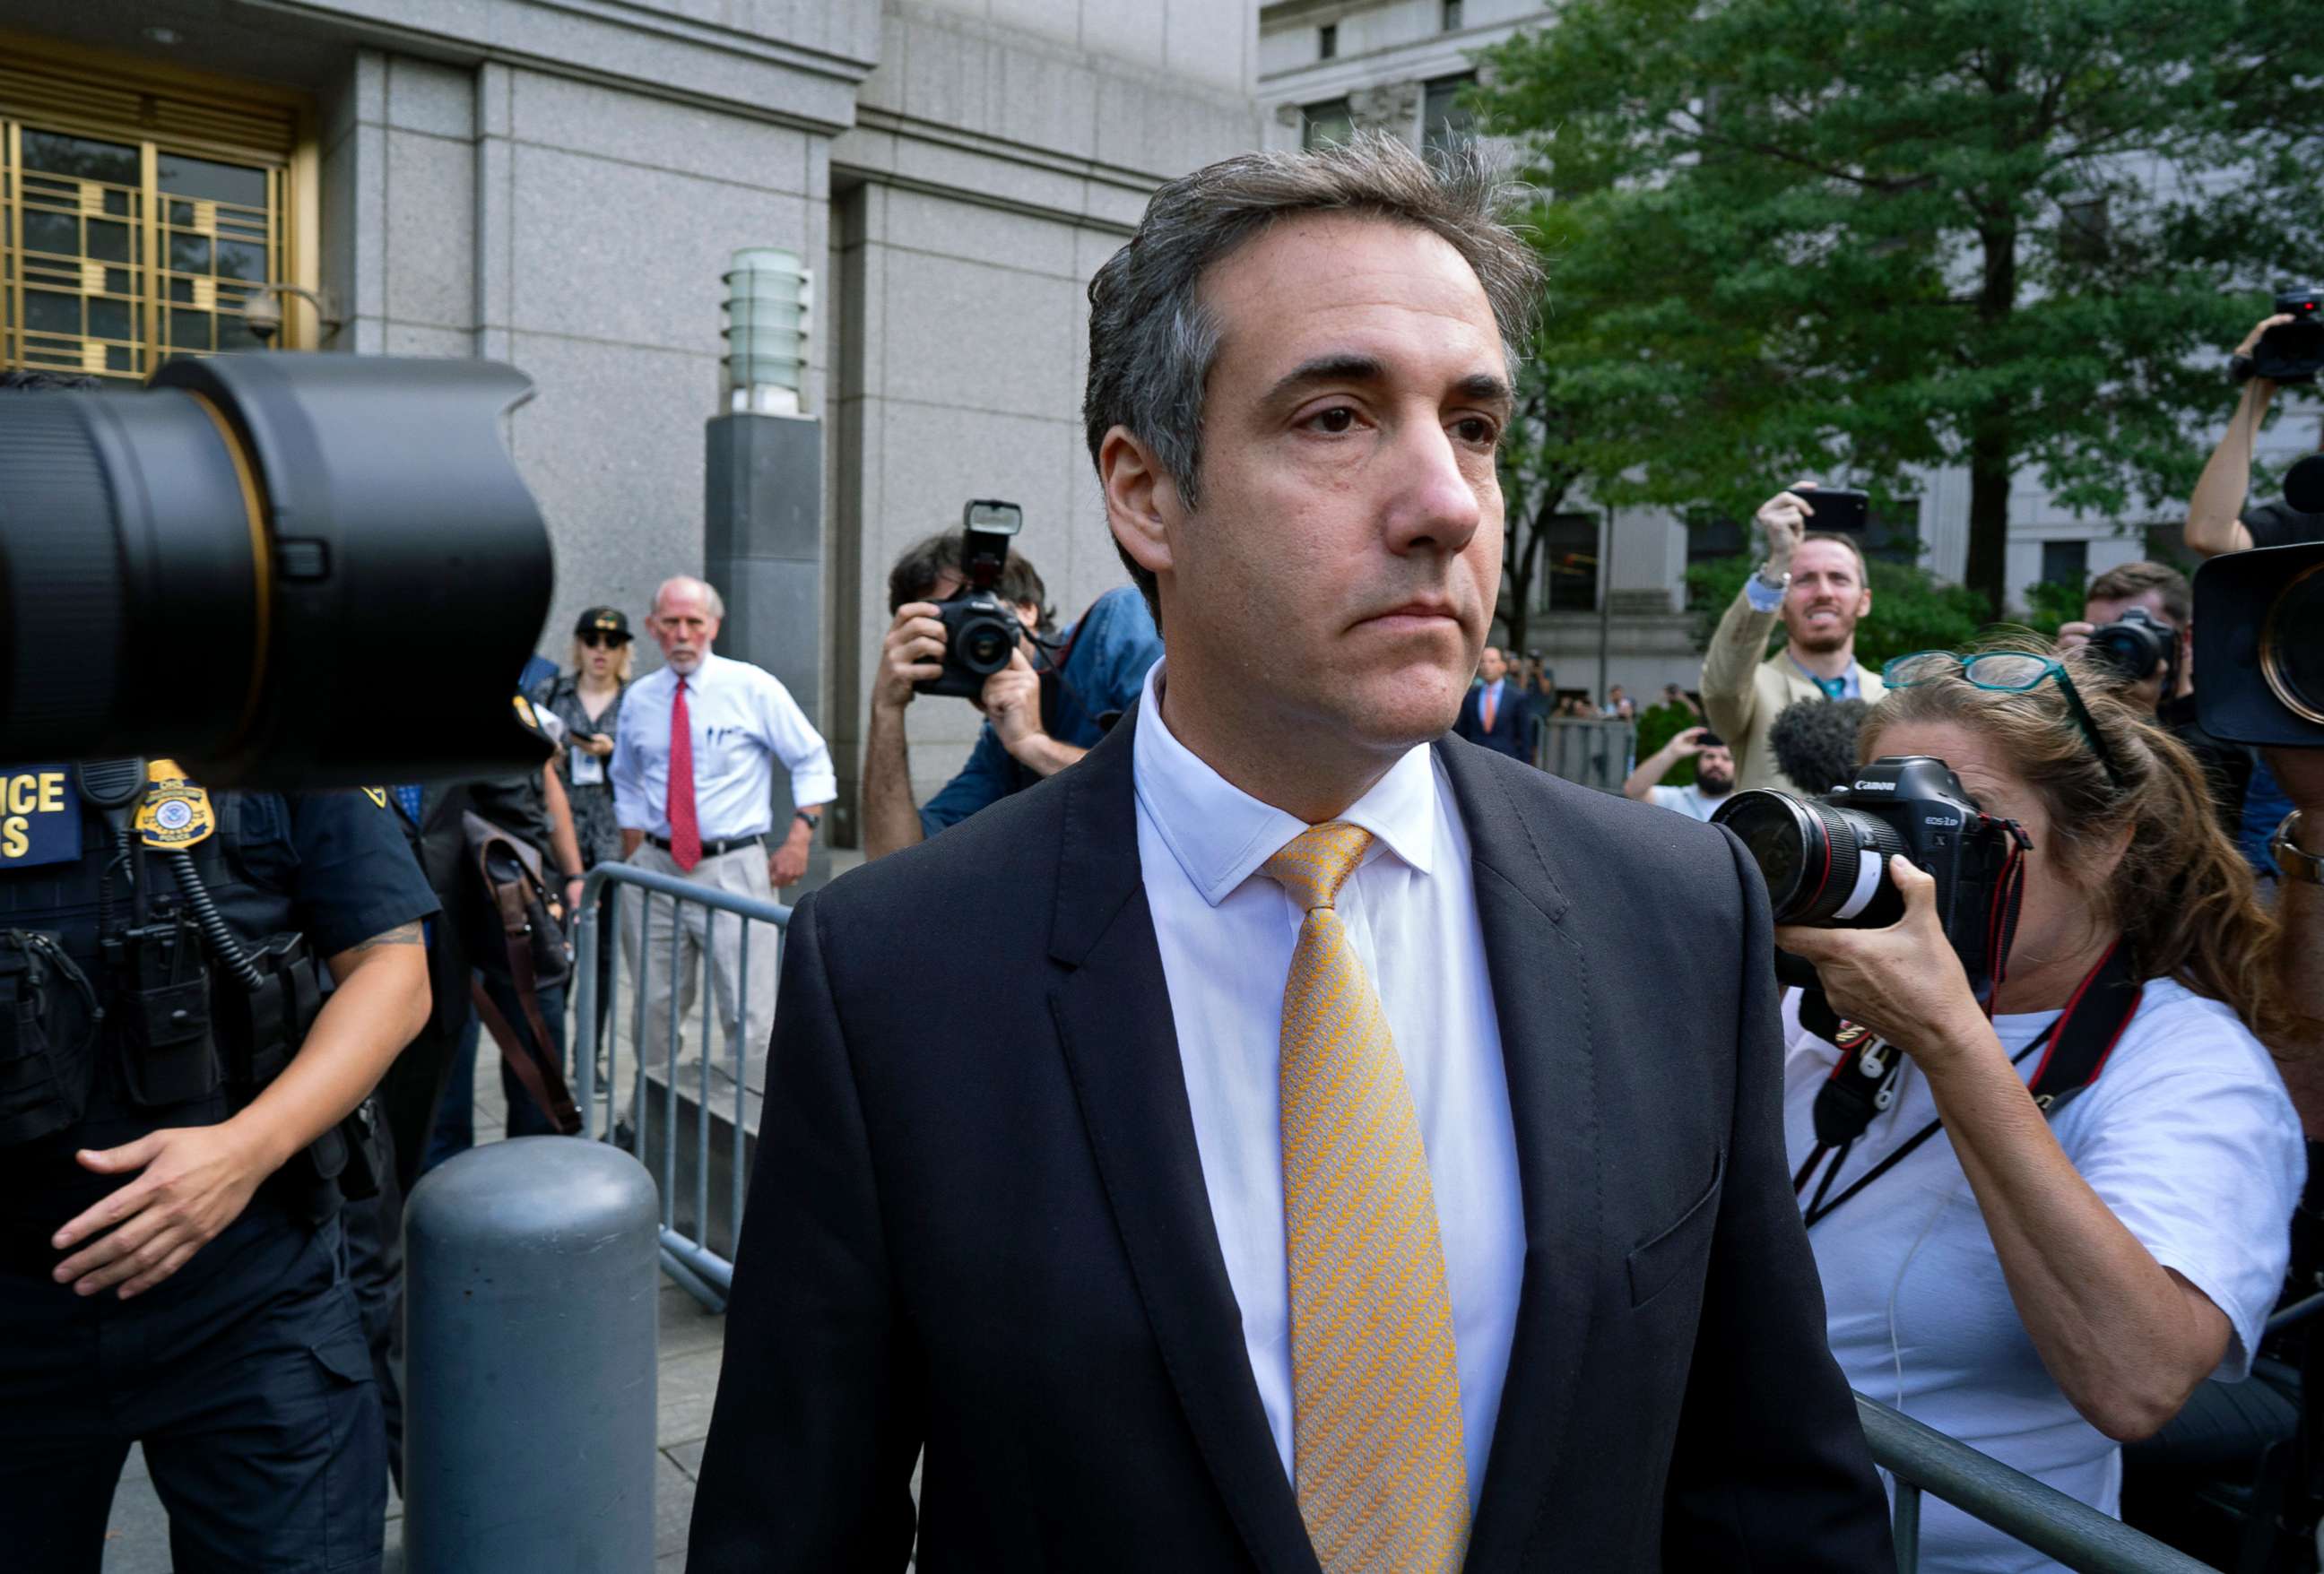 PHOTO: Michael Cohen, former personal lawyer to President Donald Trump, leaves federal court in New York, Aug. 21, 2018.